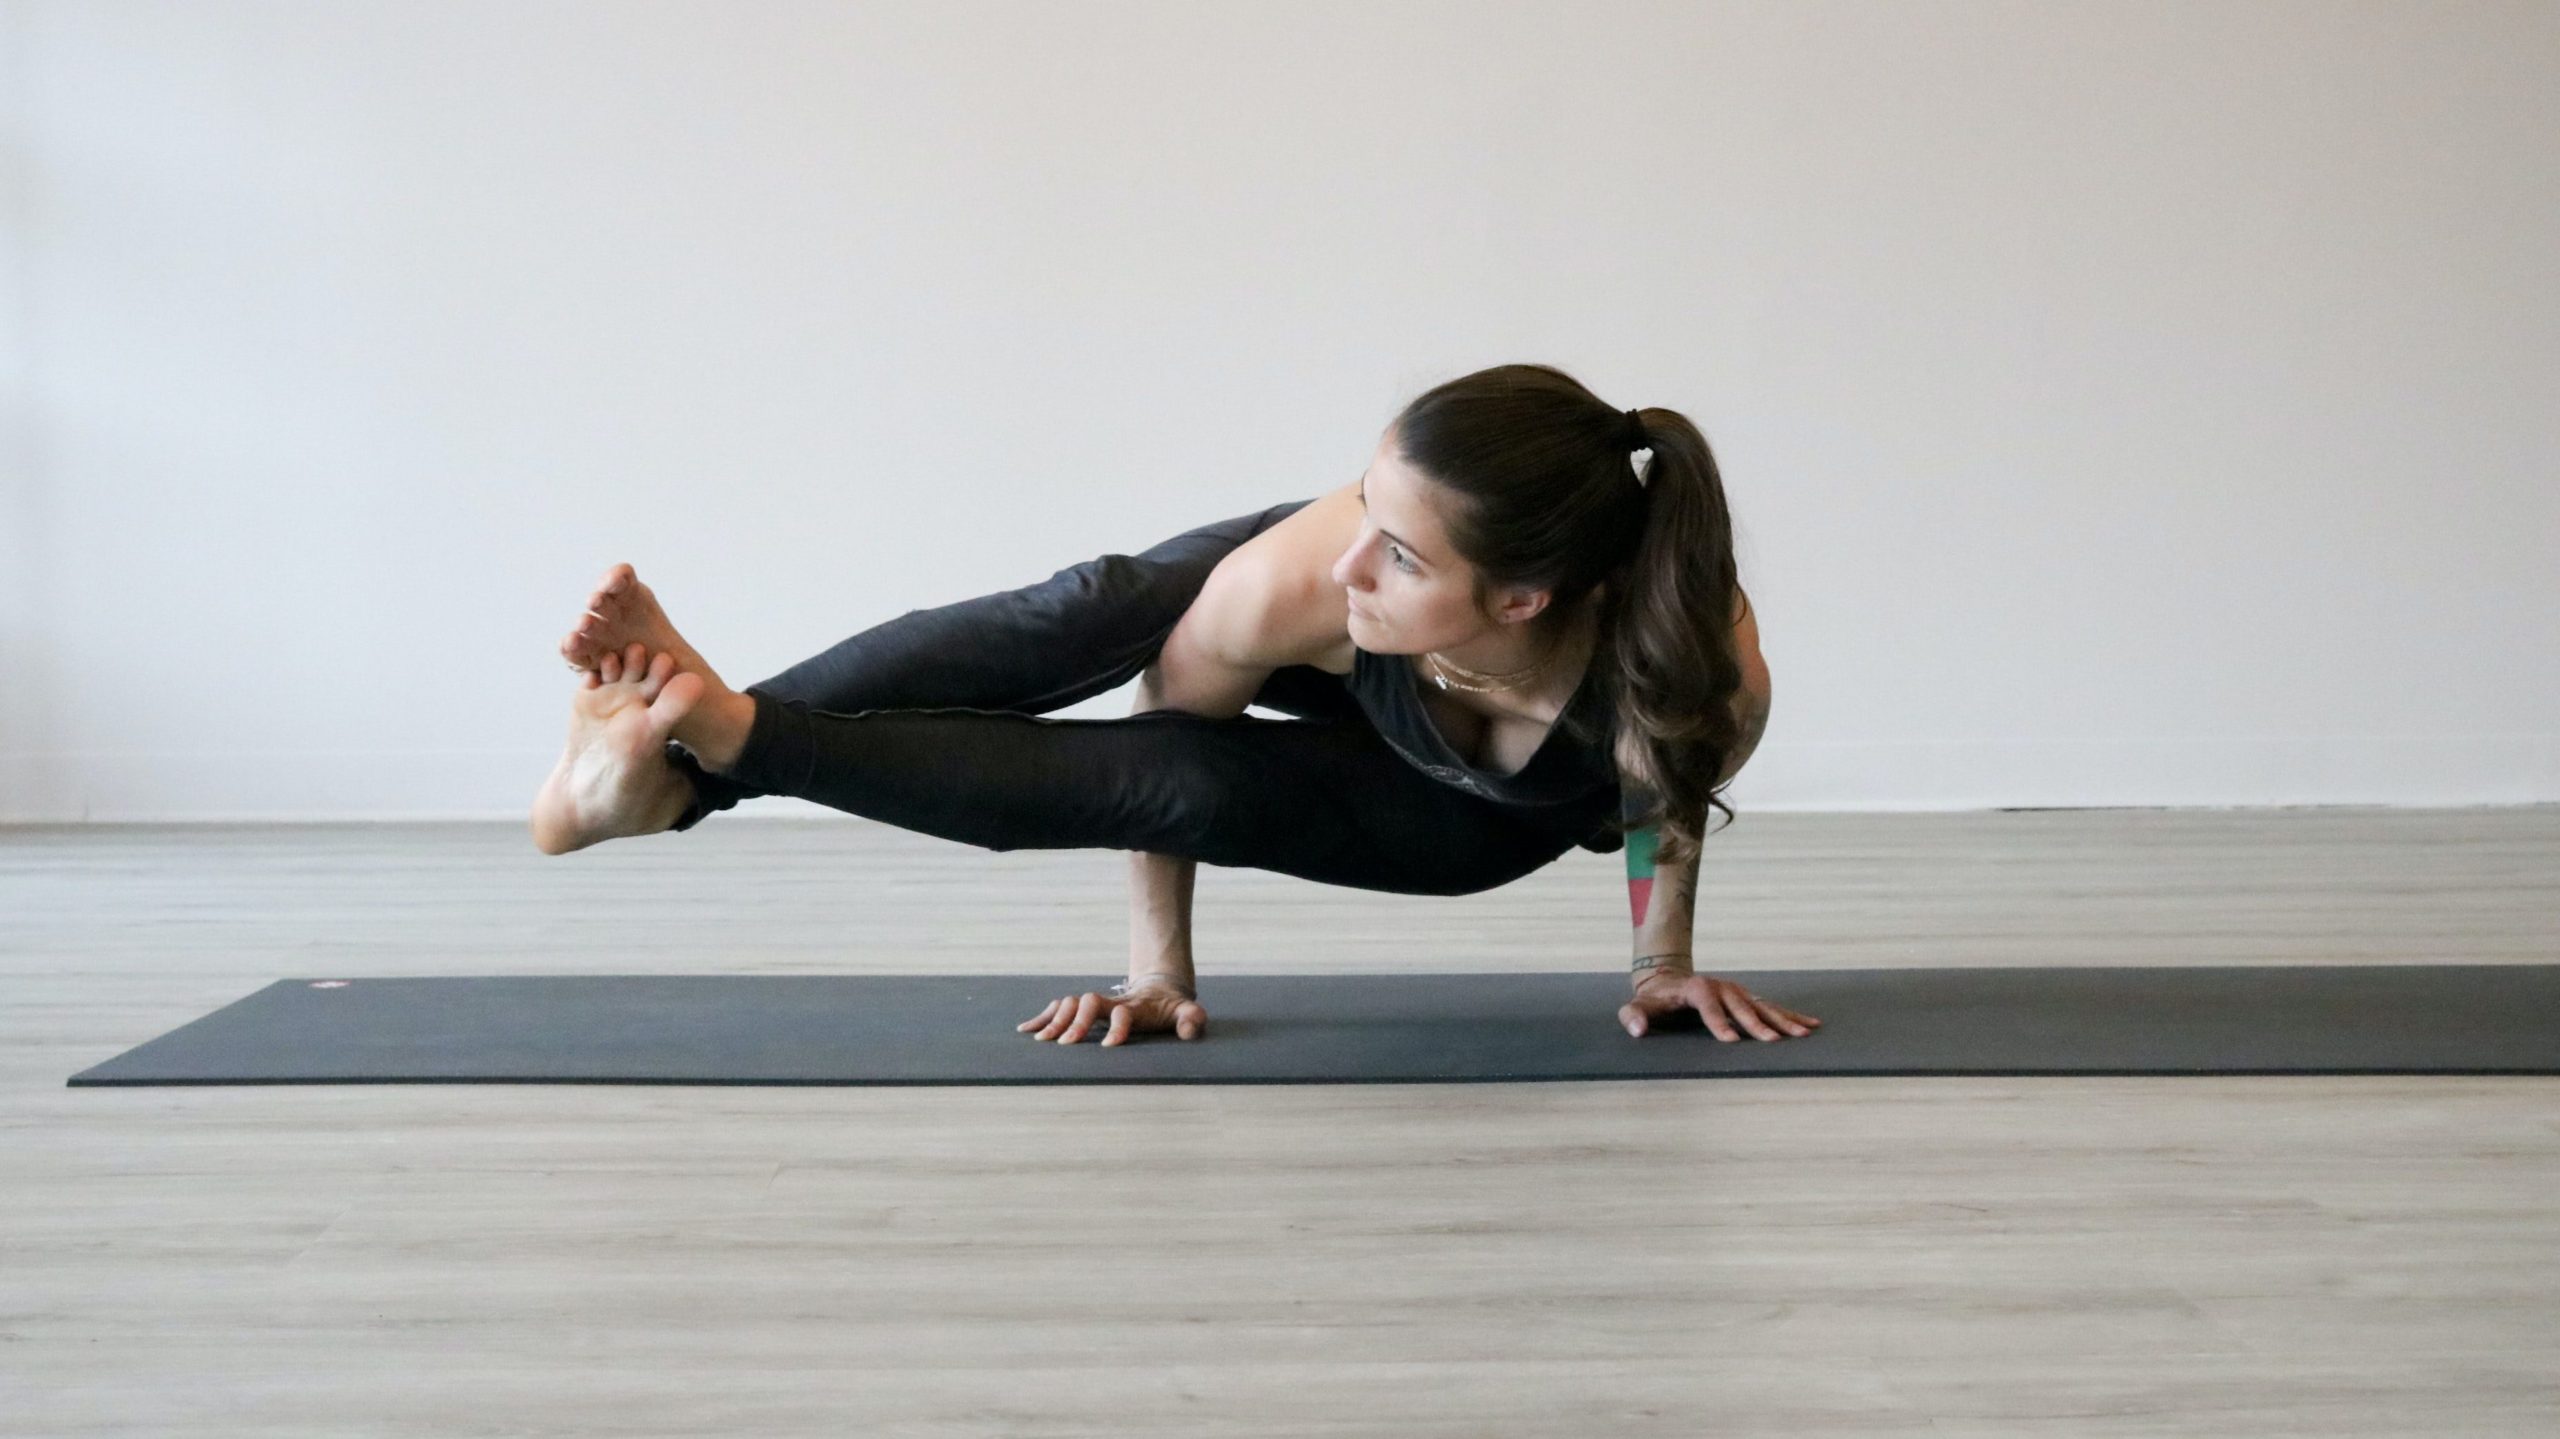 Woman performing a complicated yoga move